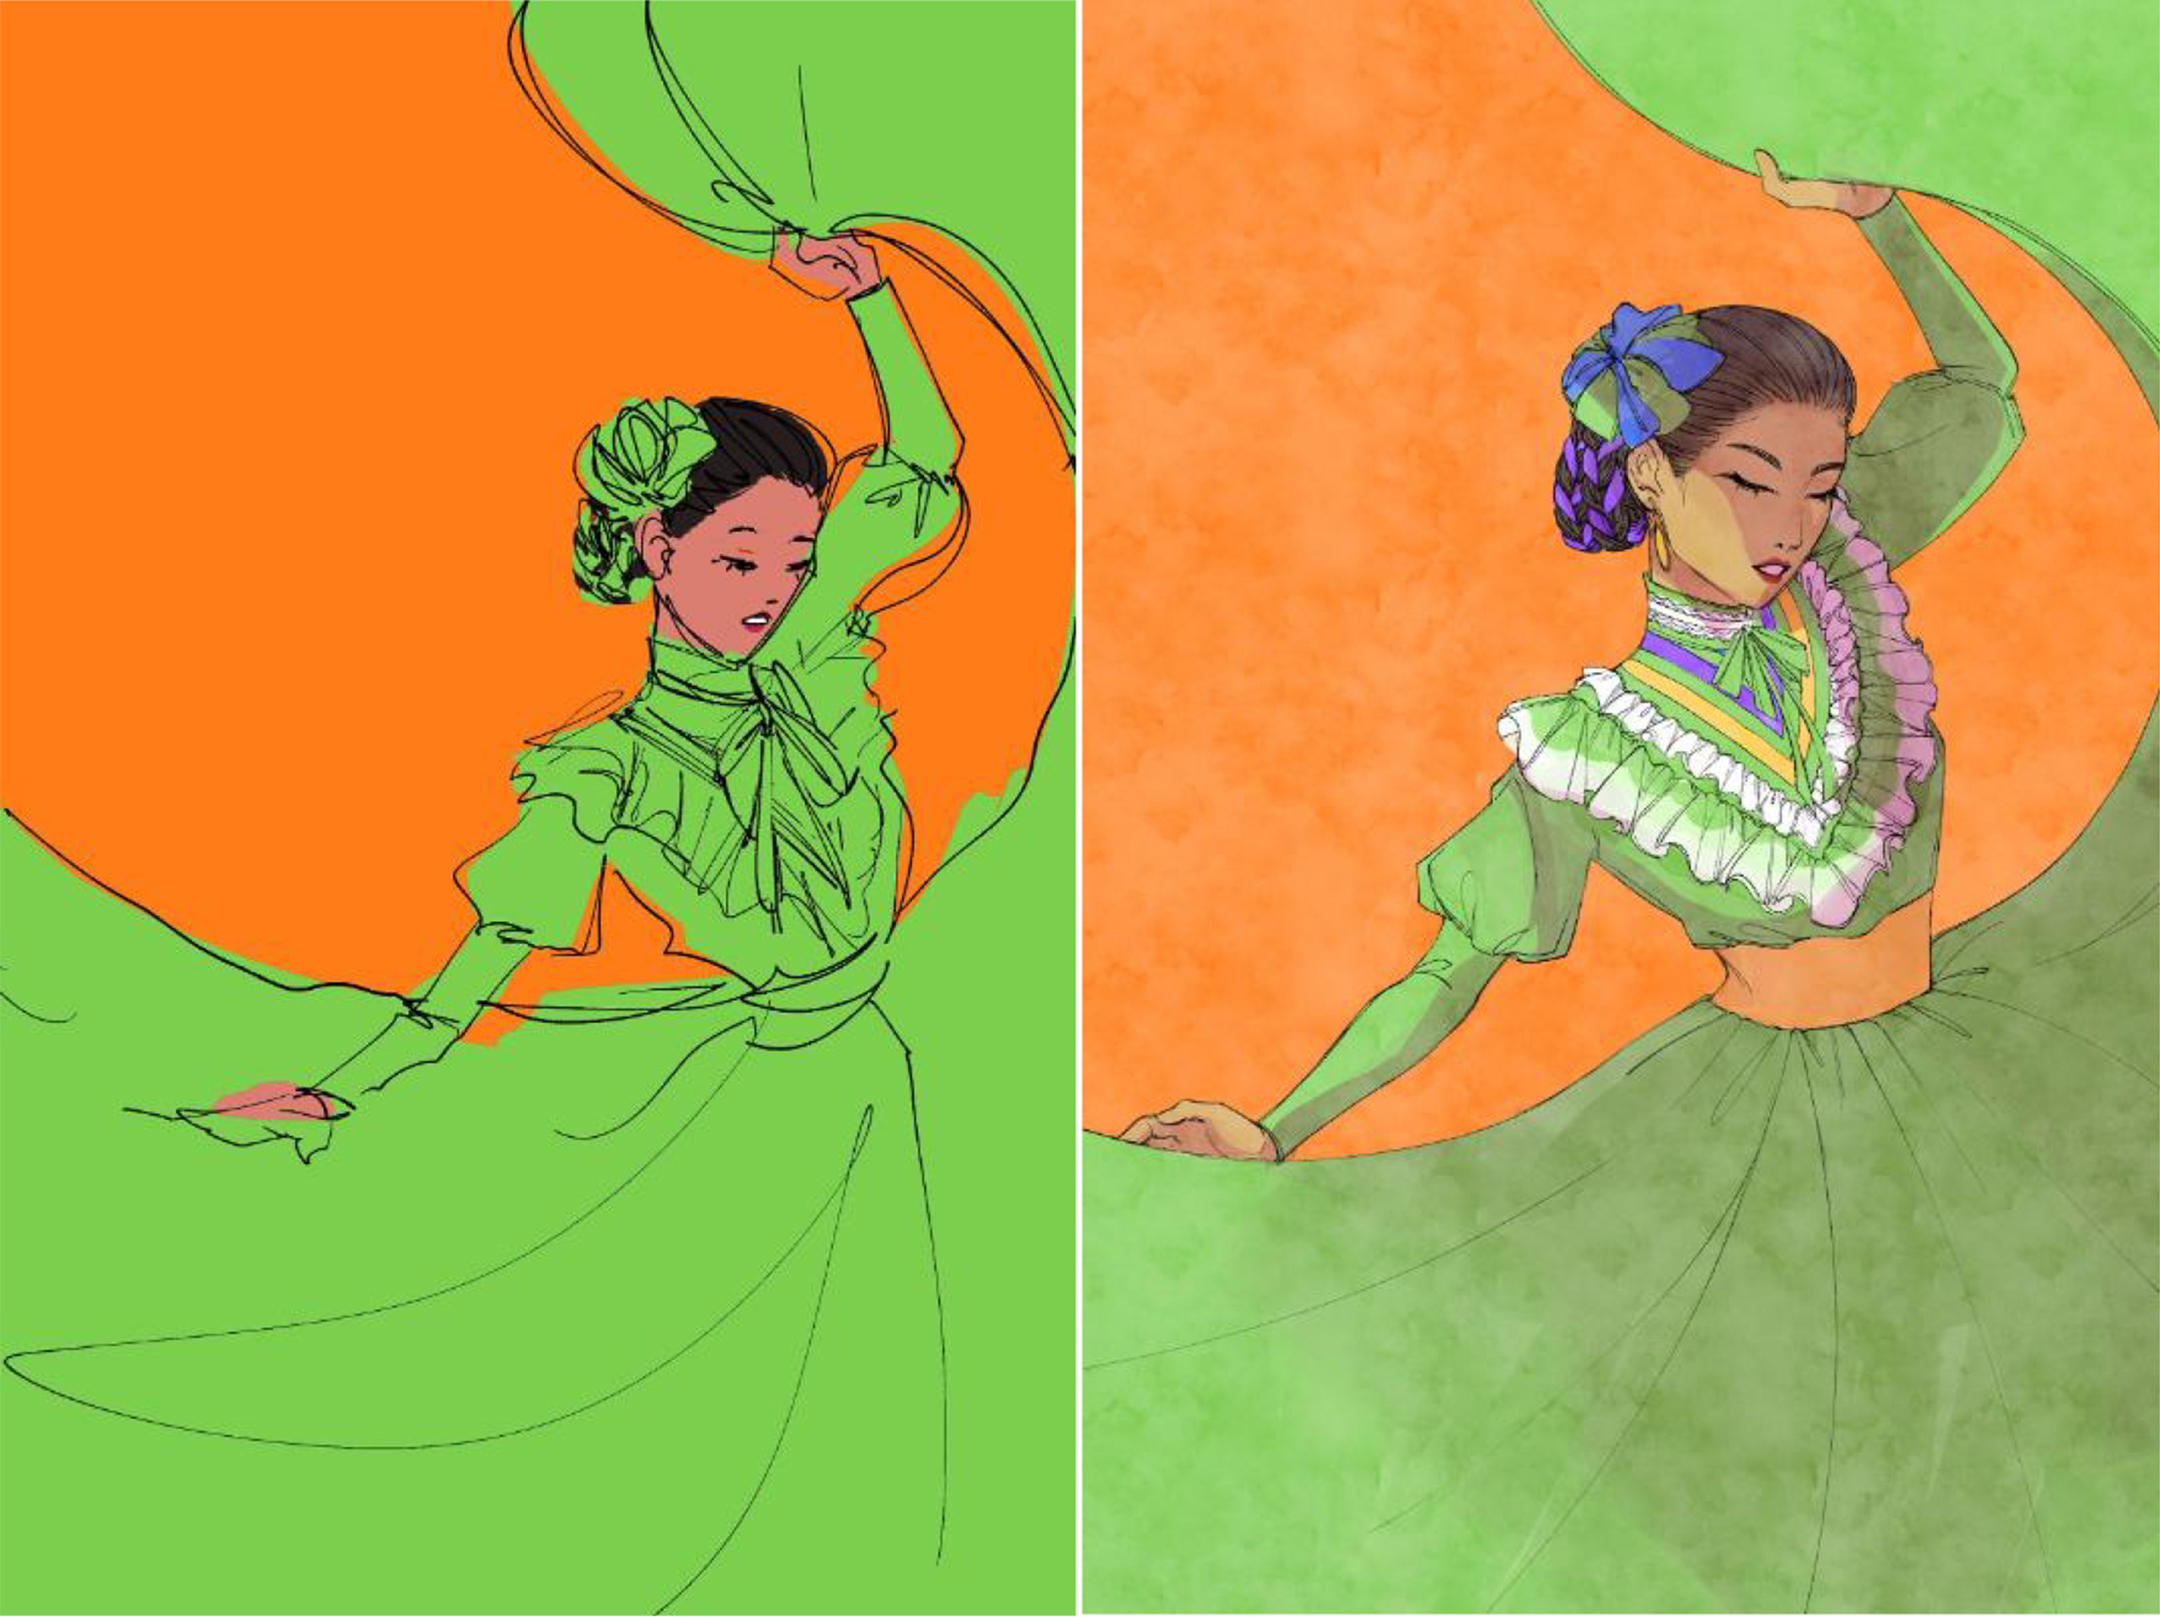 Two images, side by side, of the same illustration of a woman in a green dress dancing against an orange background, the one on the left is a rough draft and the one on the right is final